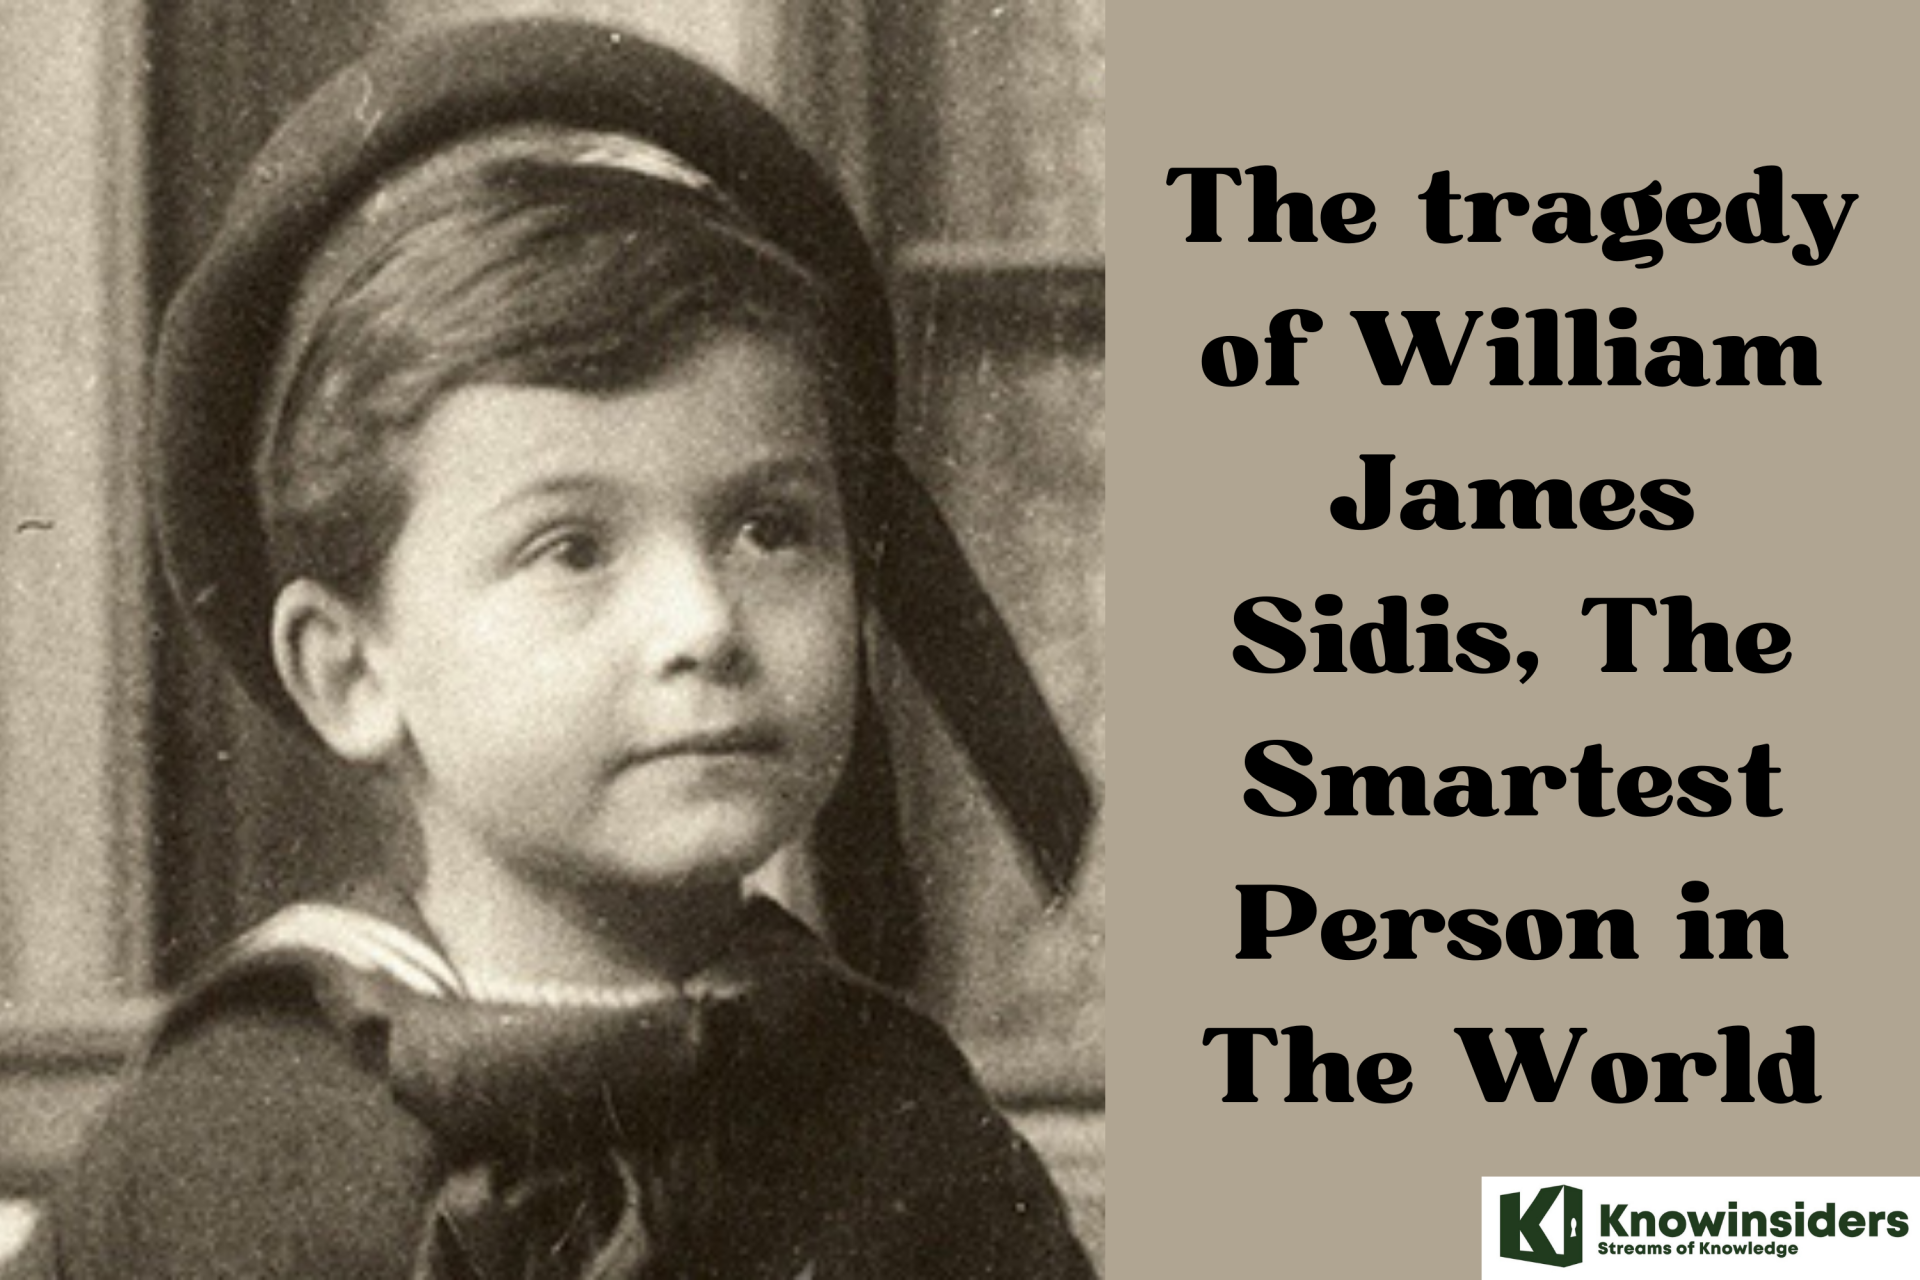 Tragedy of William James Sidis - Smartest Person Ever Lived in the World